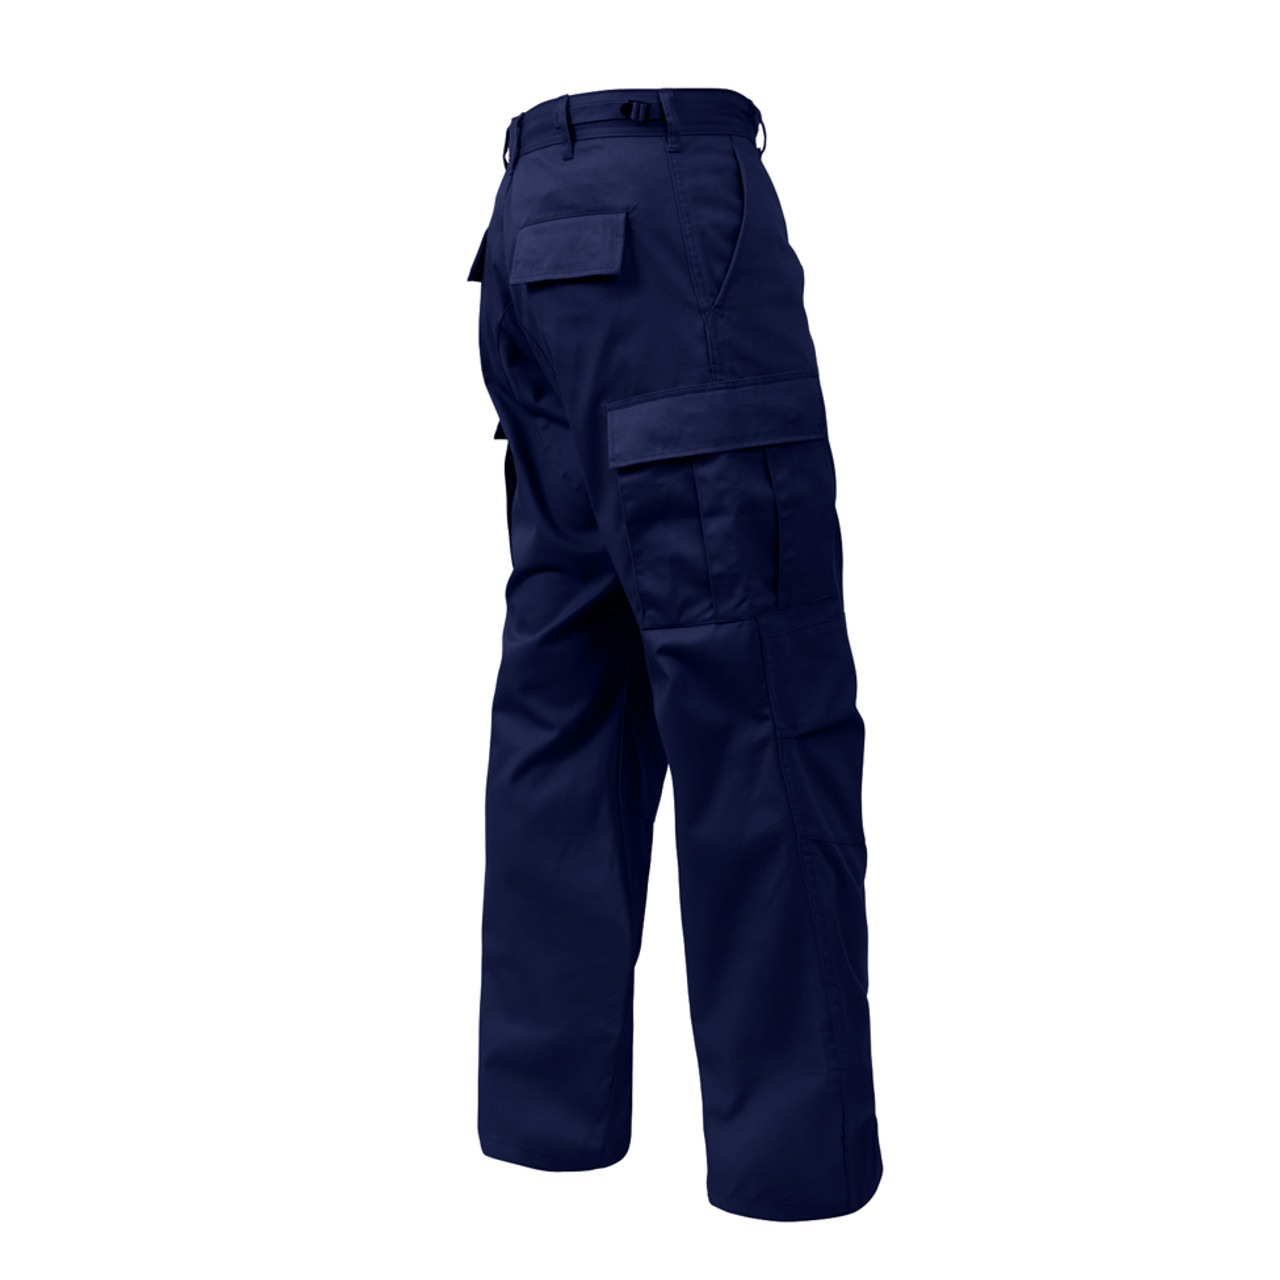 Midnight Blue EMT & Public Safety Police-Style Tactical Uniform Pants 